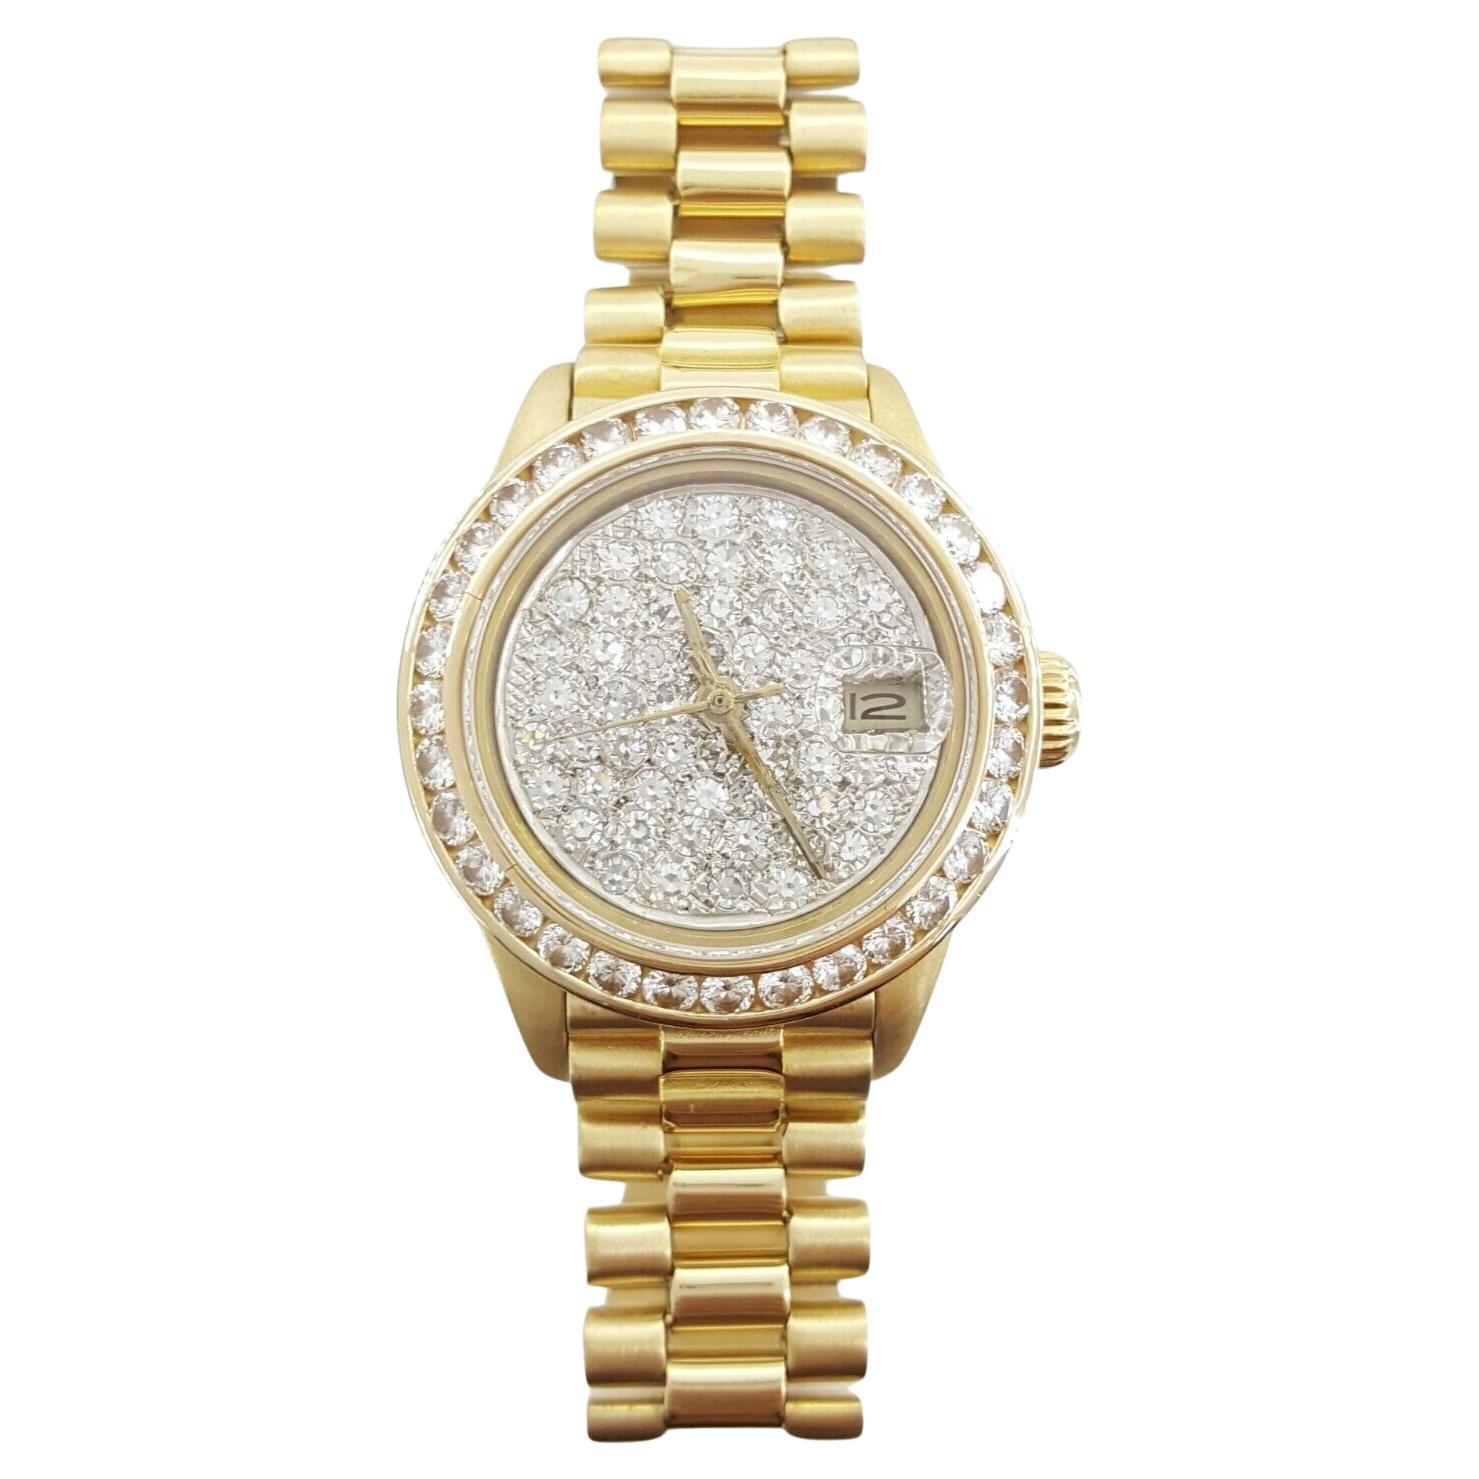 Montre ROLEX Lady Date-Just President or jaune